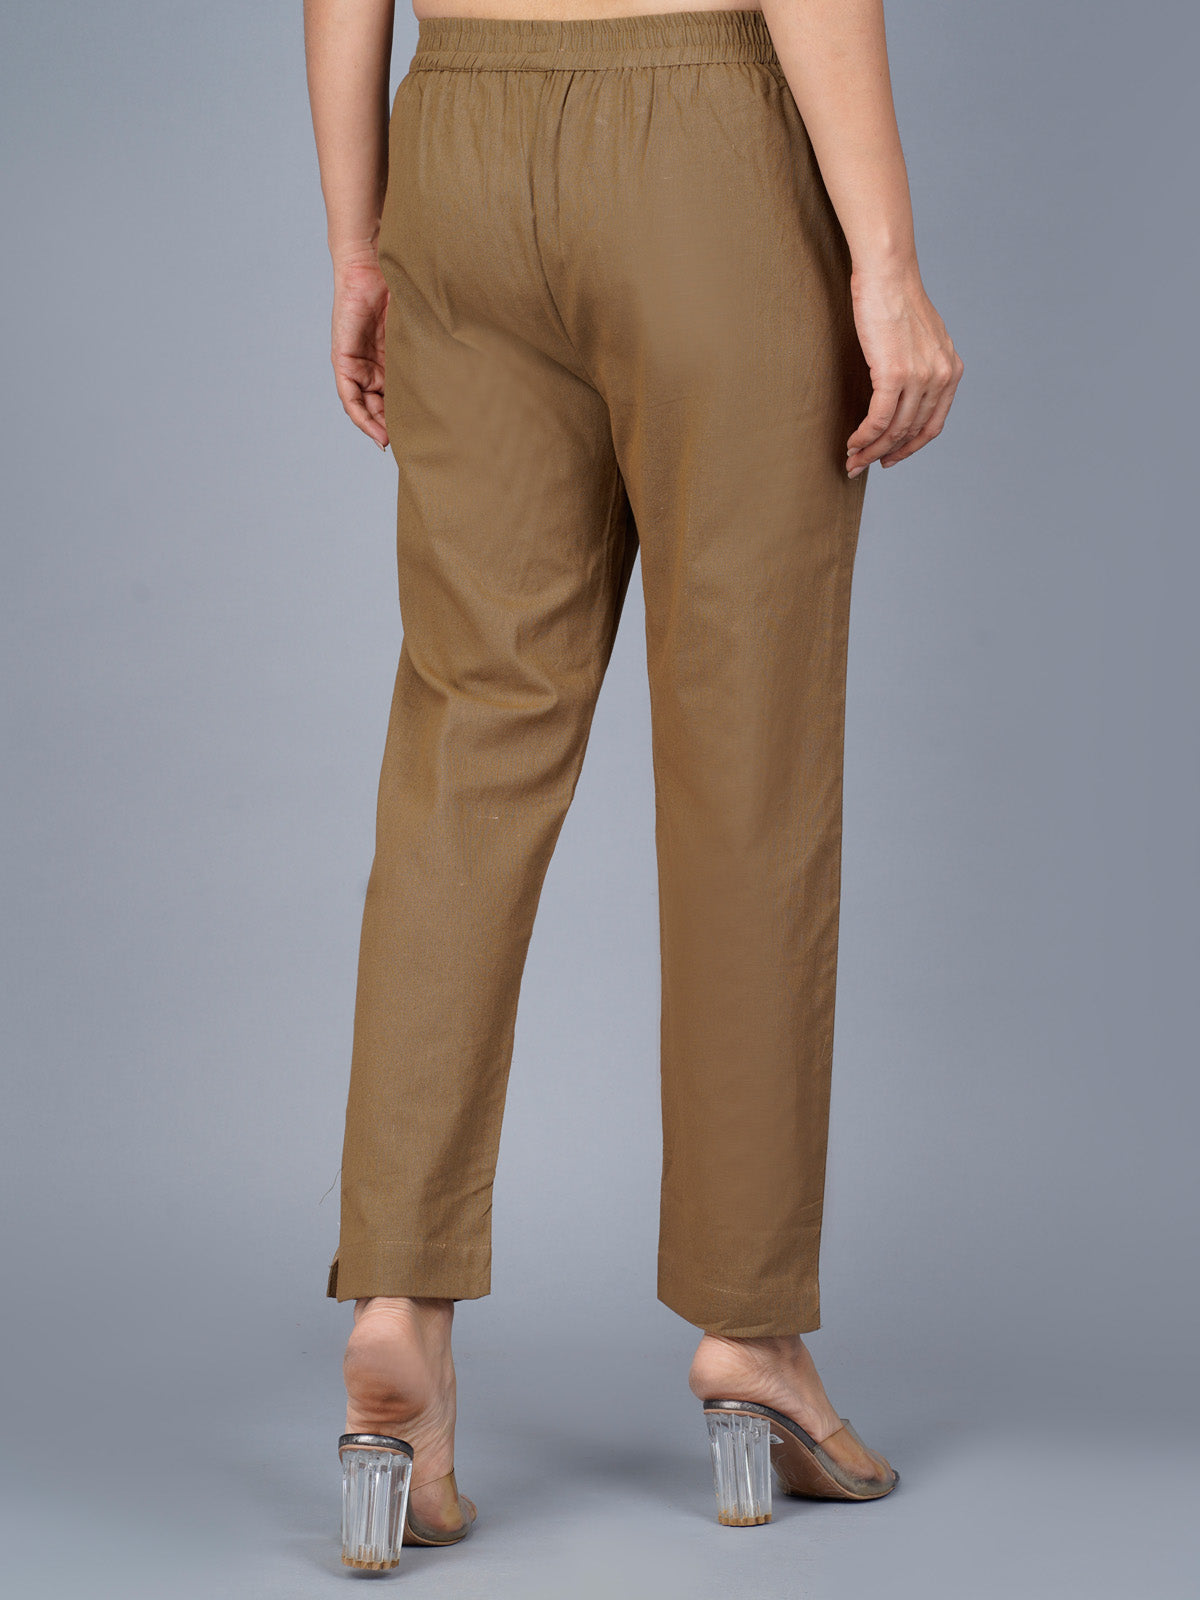 Pack Of 2 Womens Regular Fit Mustard And Brown Fully Elastic Waistband Cotton Trouser